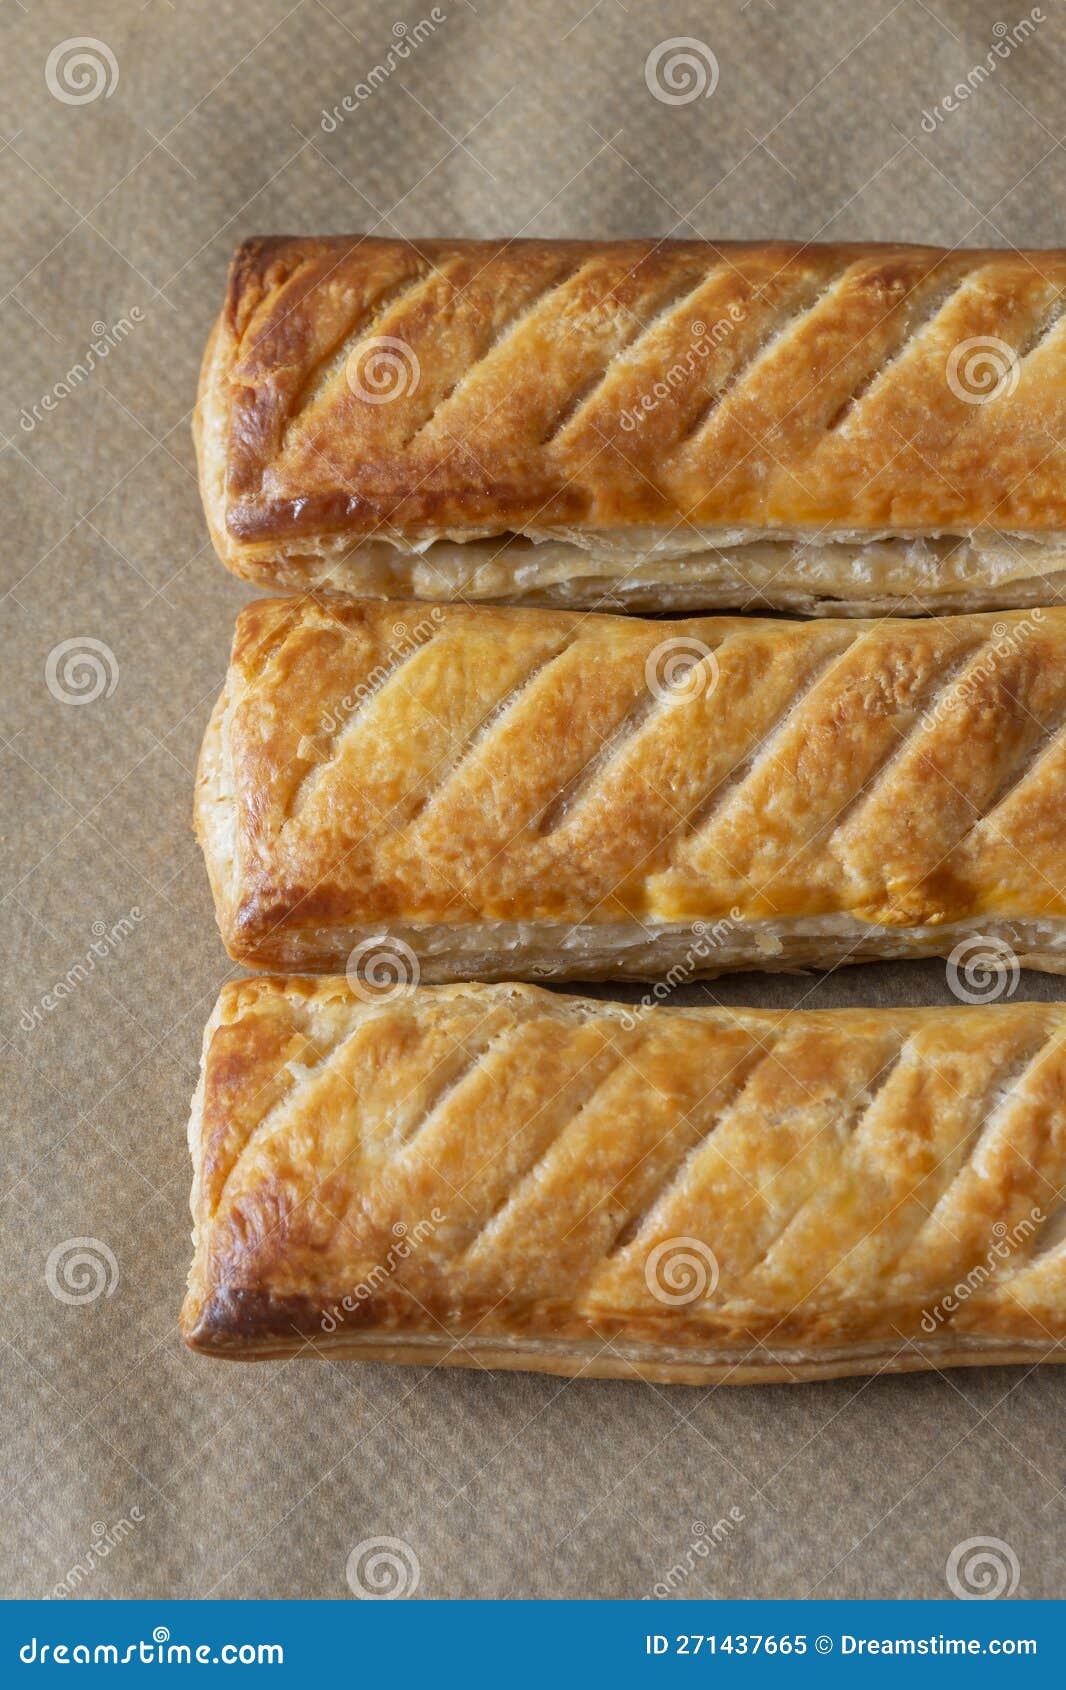 sausage rolls cooked on brown greaseproof baking paper. traditional british food